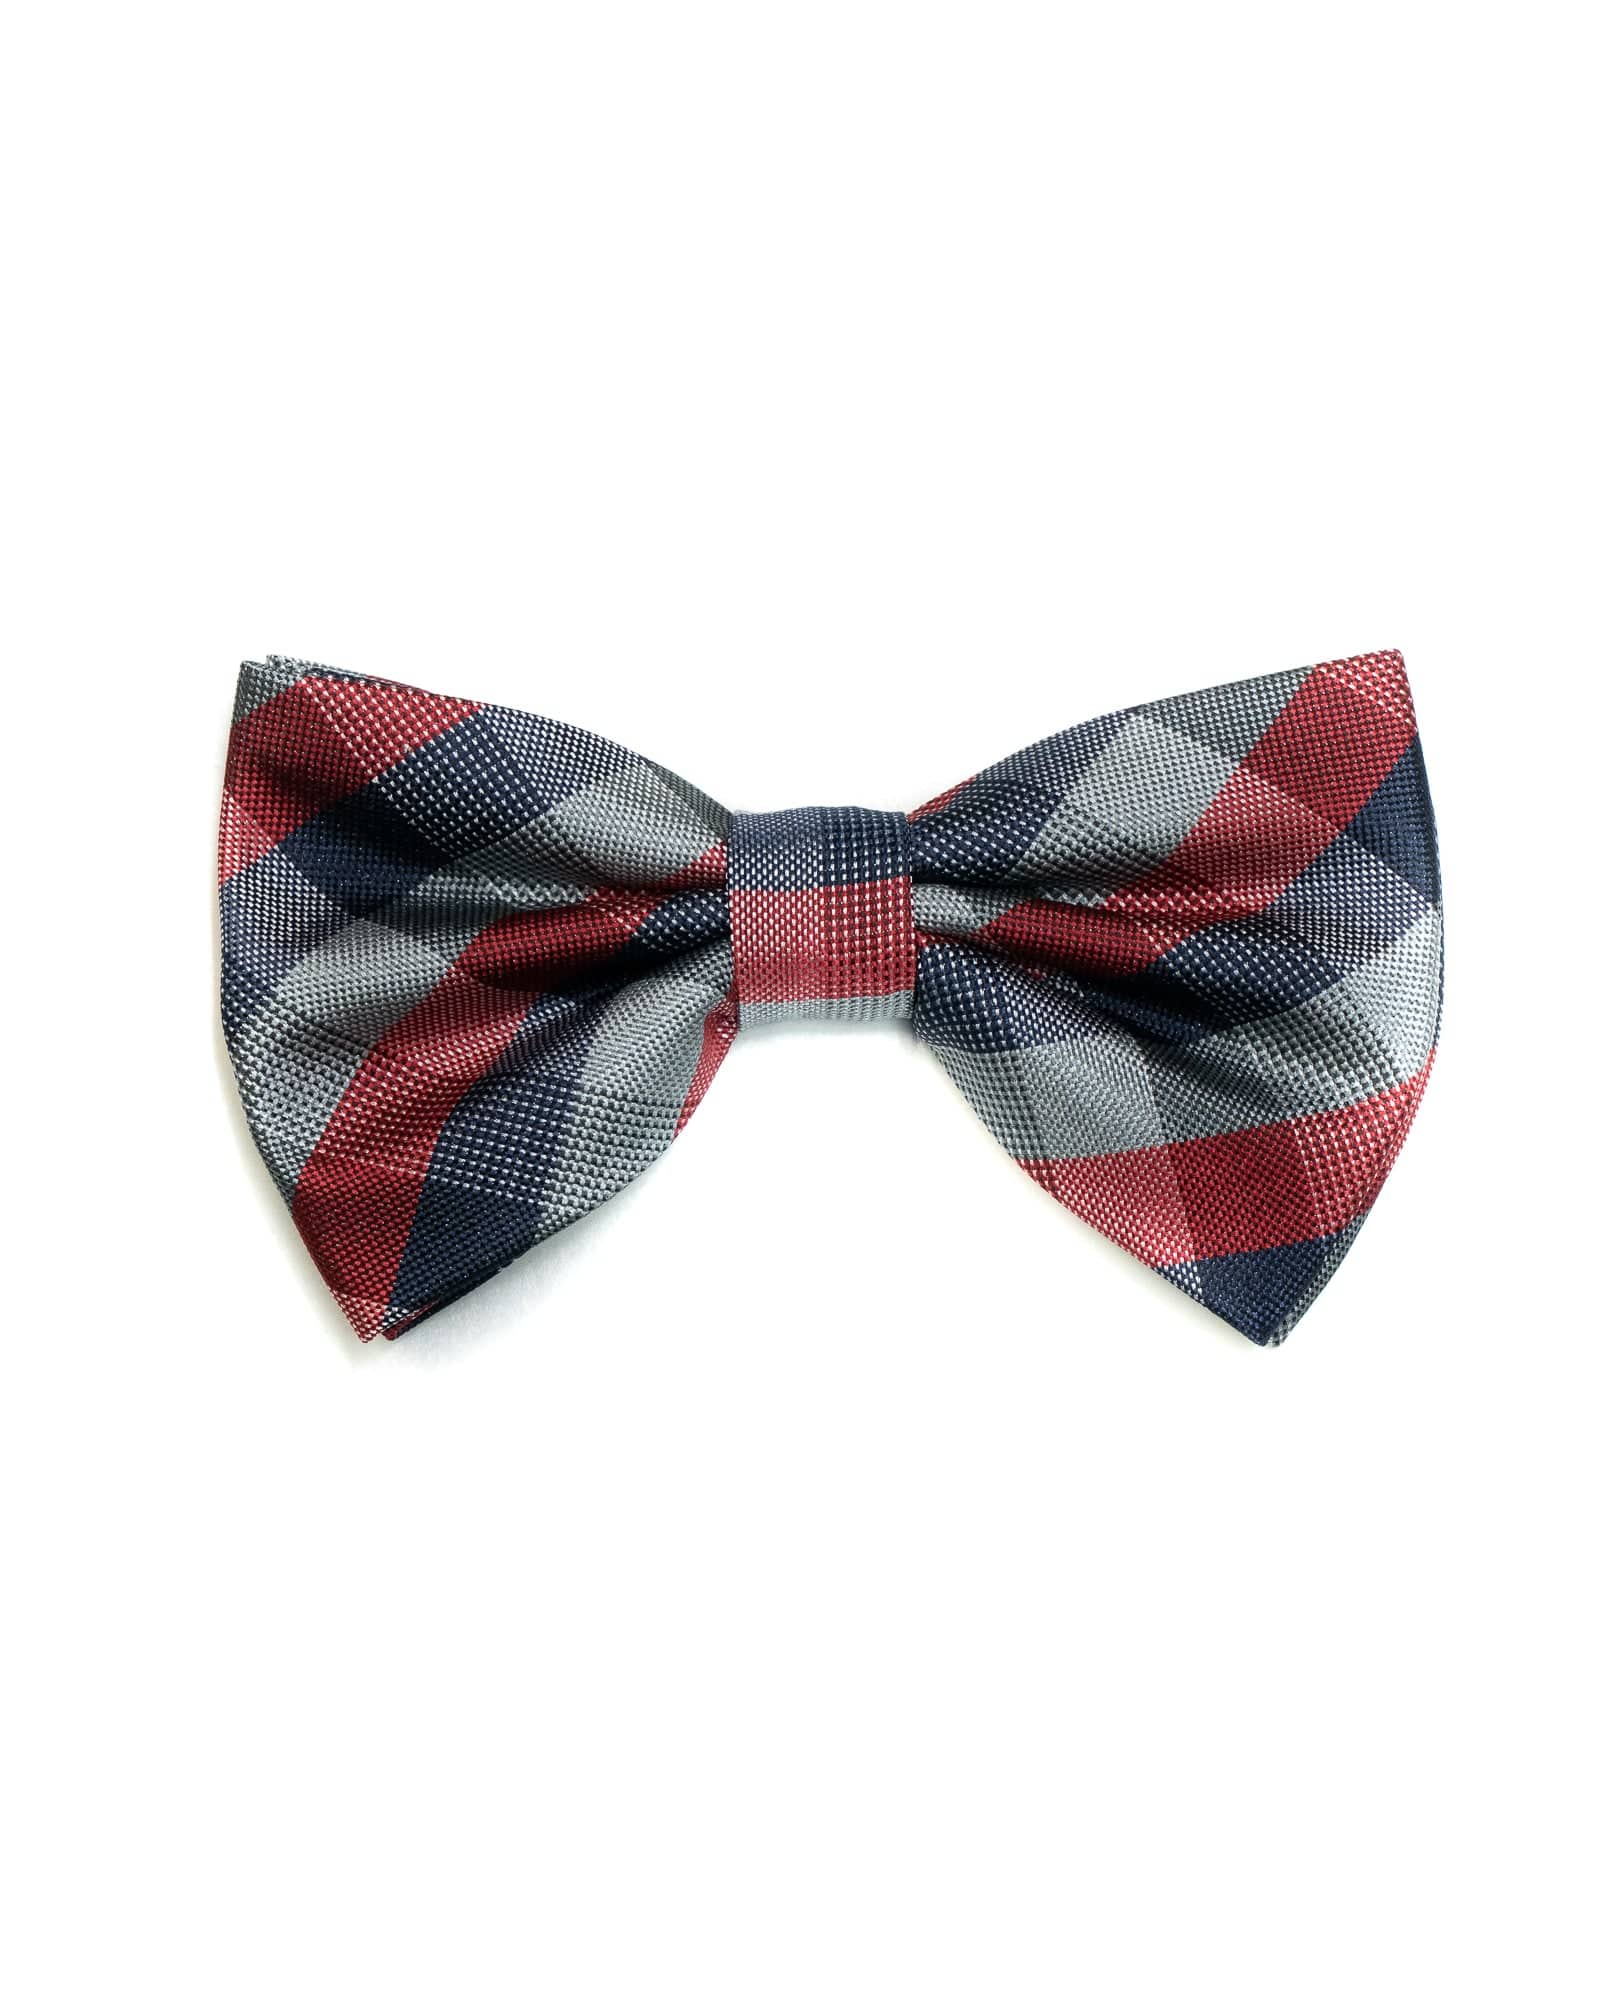 Bow Tie In Plaid Pattern Red & Navy - Rainwater's Men's Clothing and Tuxedo Rental